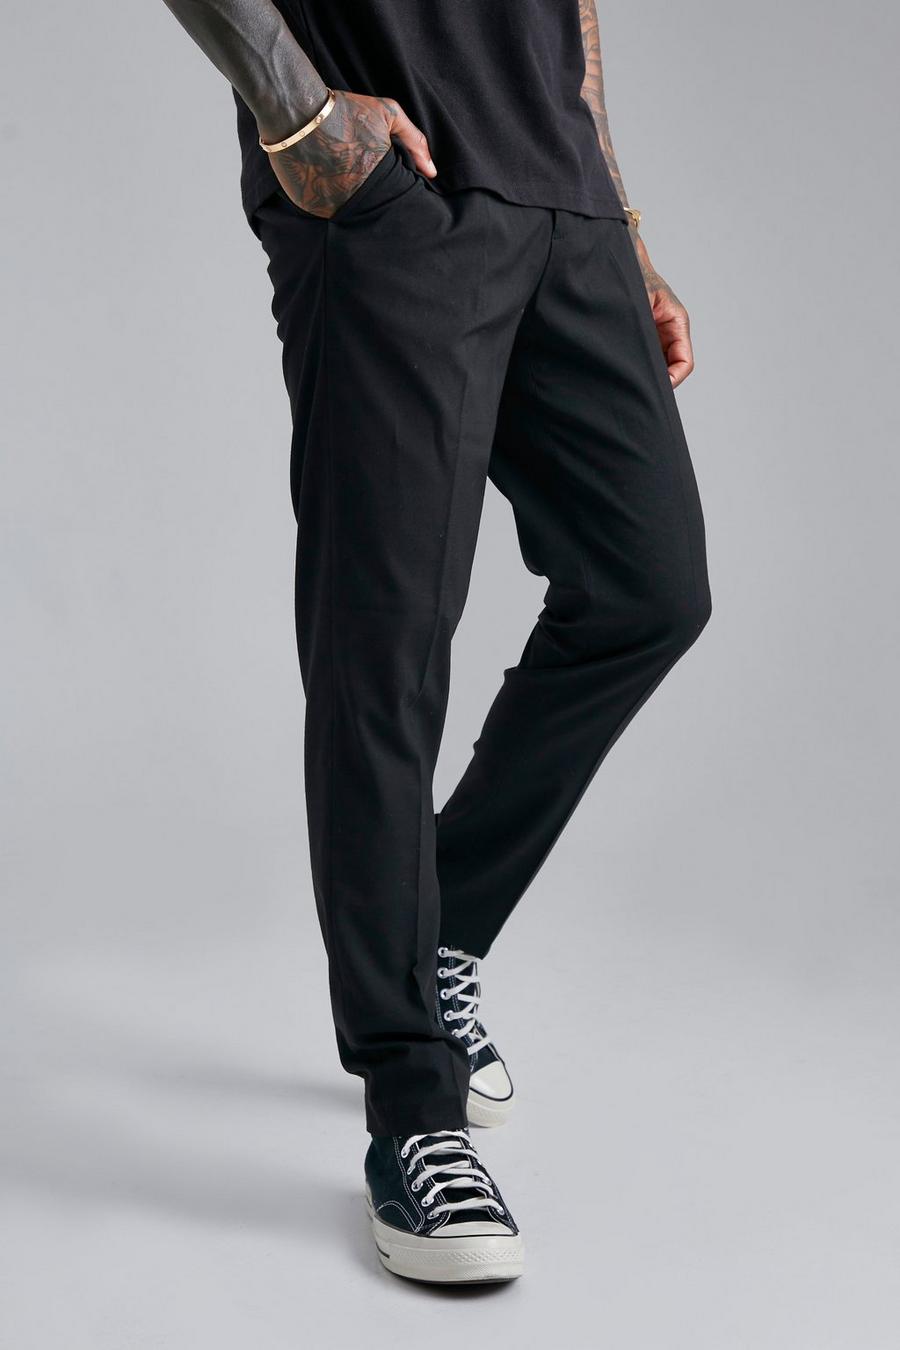 Slim Fit 2 Pack Black Tailored Trousers